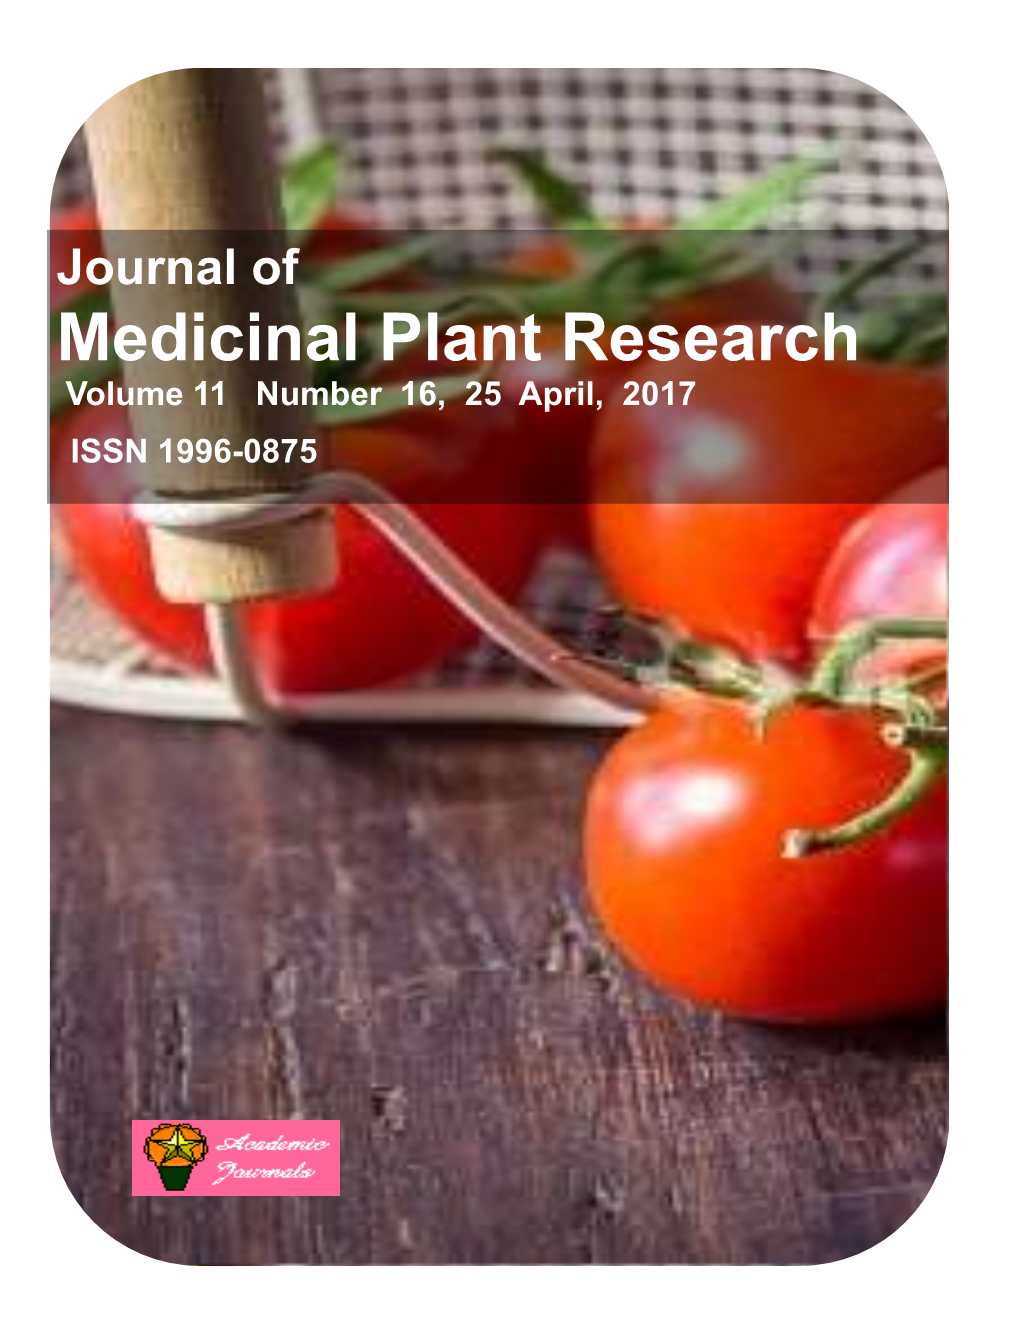 Medicinal Plant Research Volume 11 Number 16, 25 April, 2017 ISSN 1996-0875